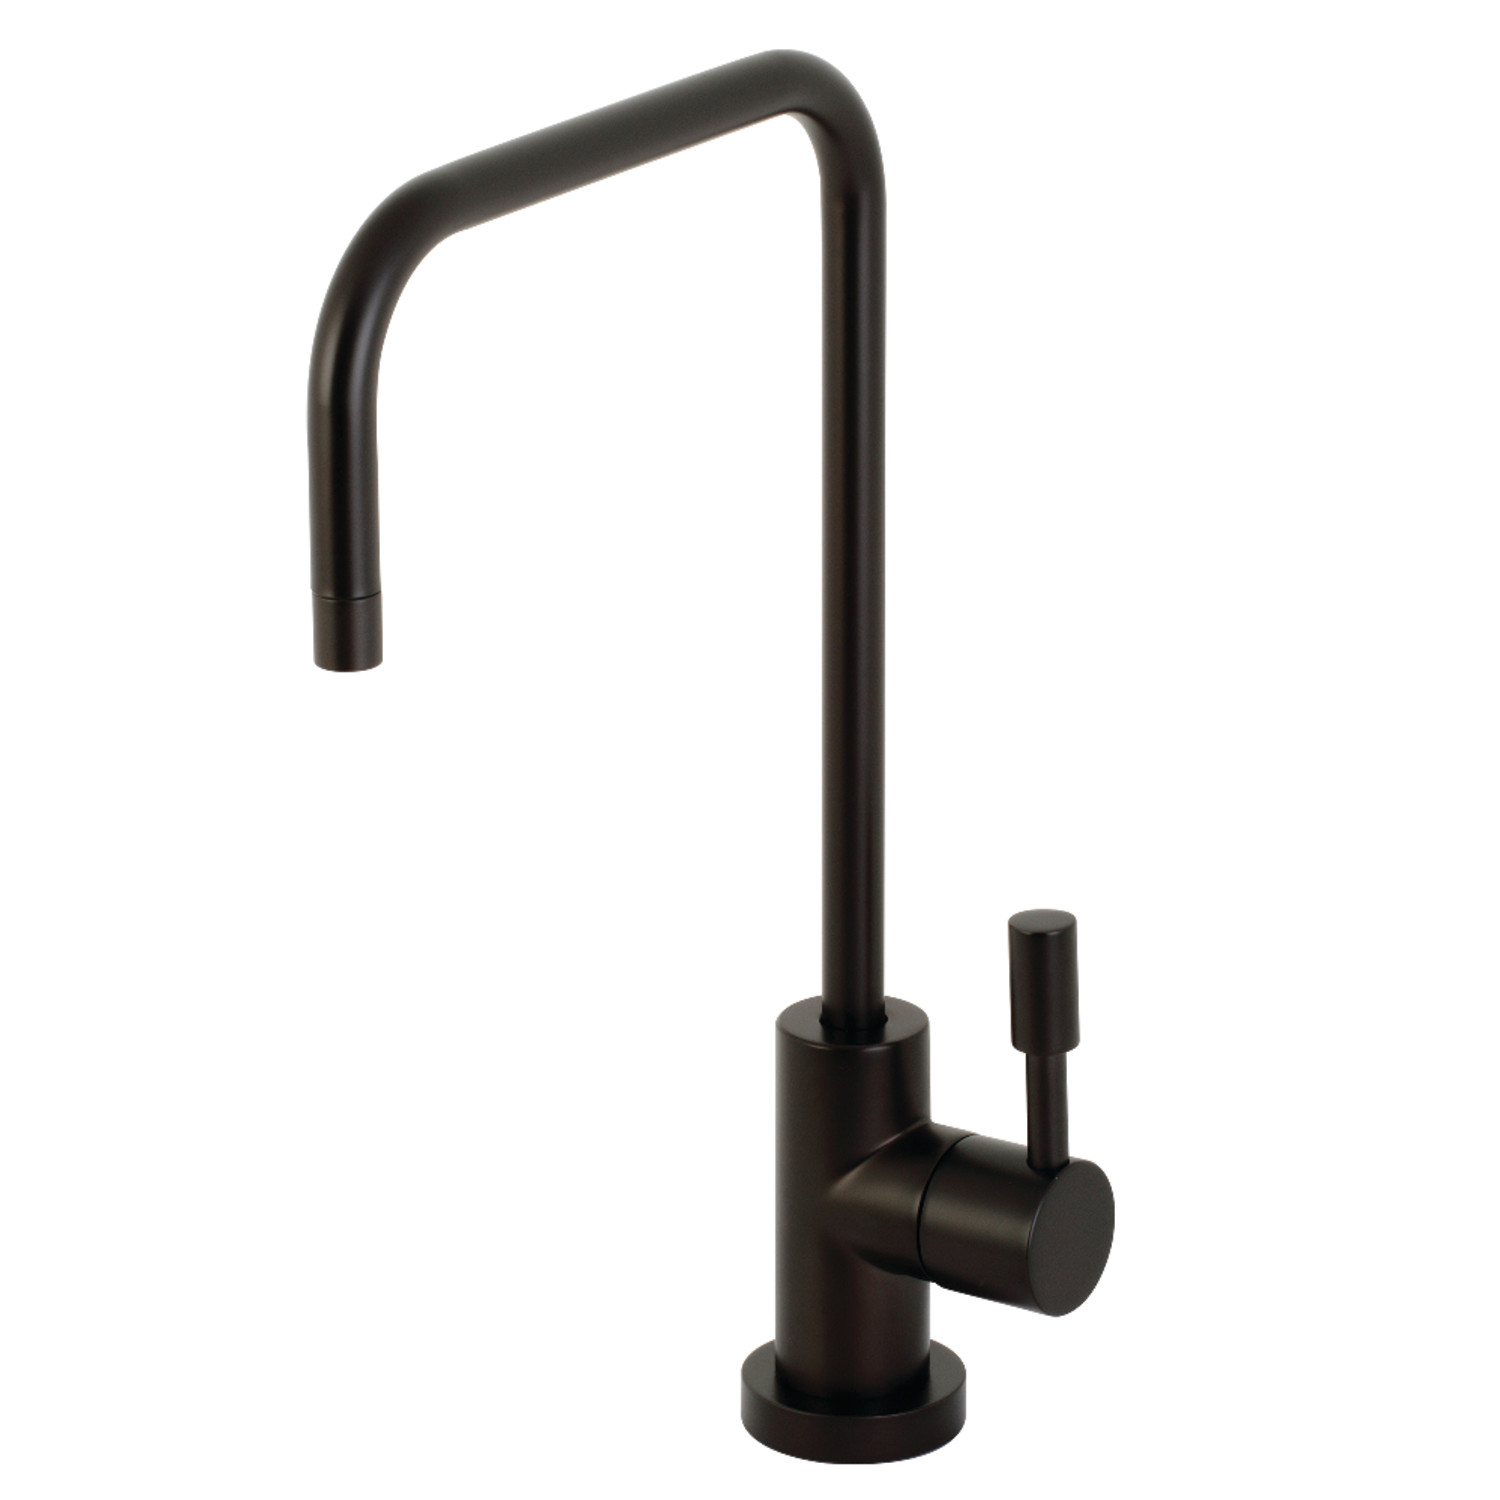 Kingston Brass KS6195DL Concord Single-Handle Water Filtration Faucet, Oil Rubbed Bronze - image 1 of 5